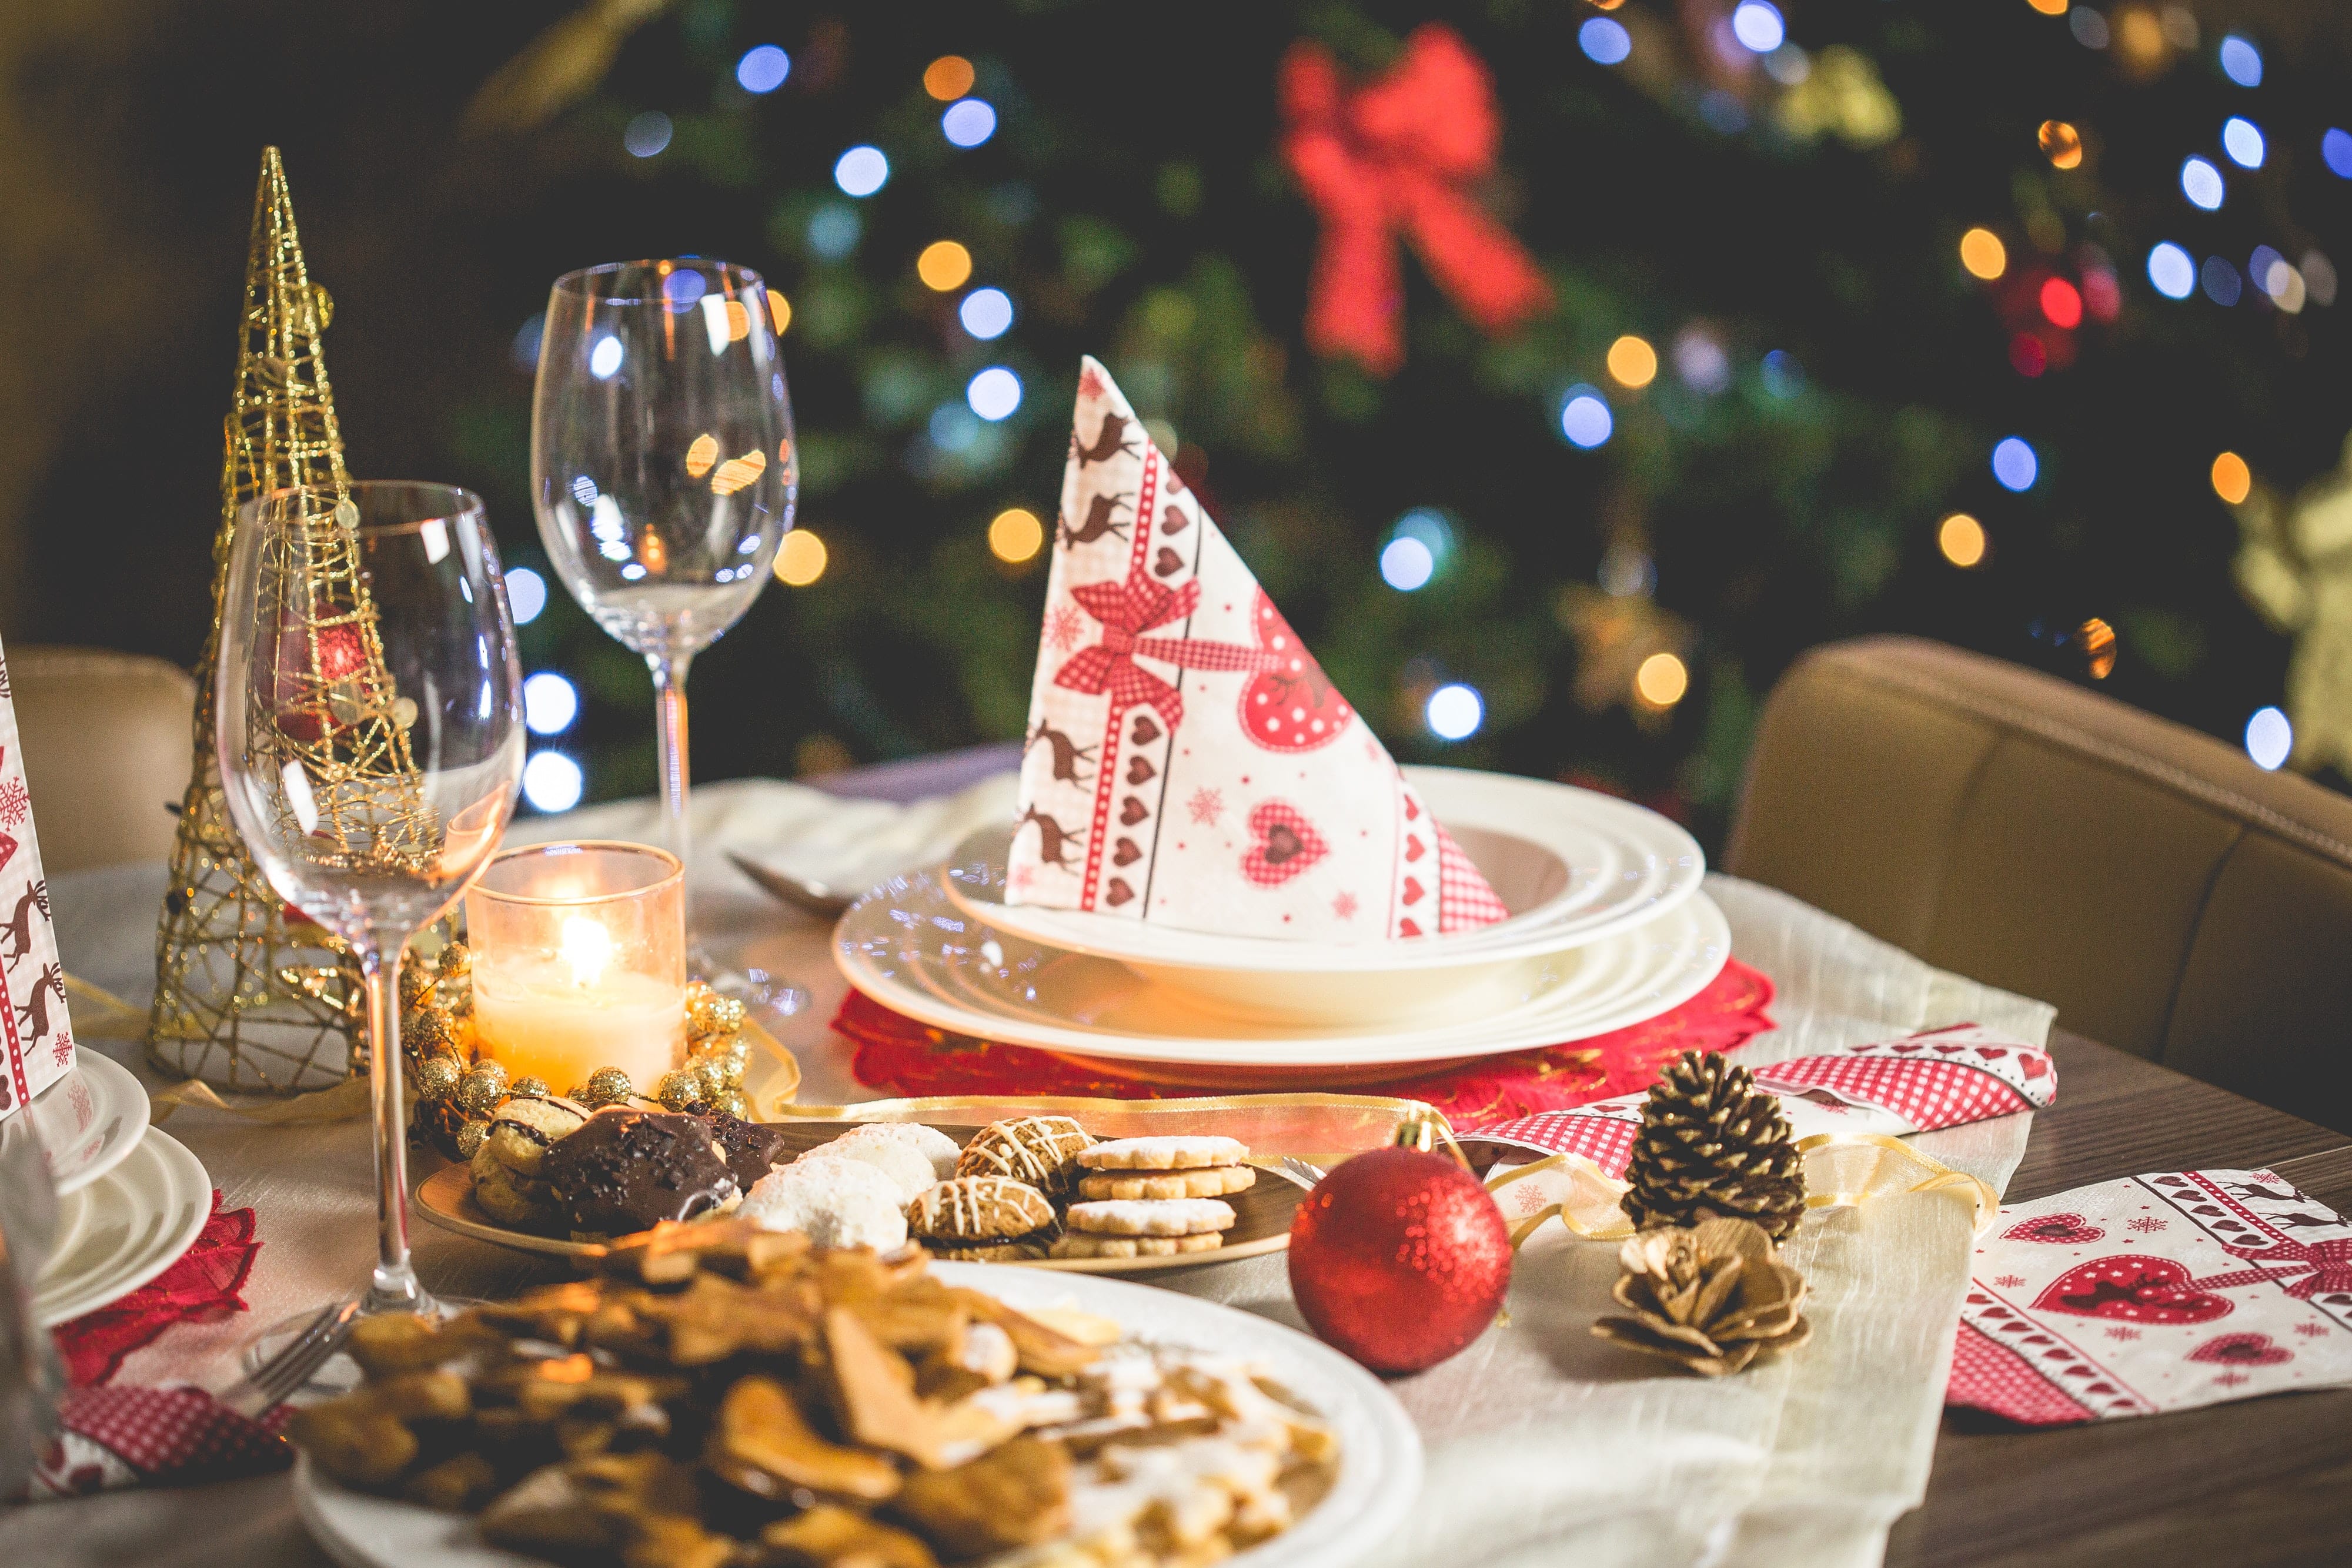 White dinner plate with festive holiday napkin placed on top